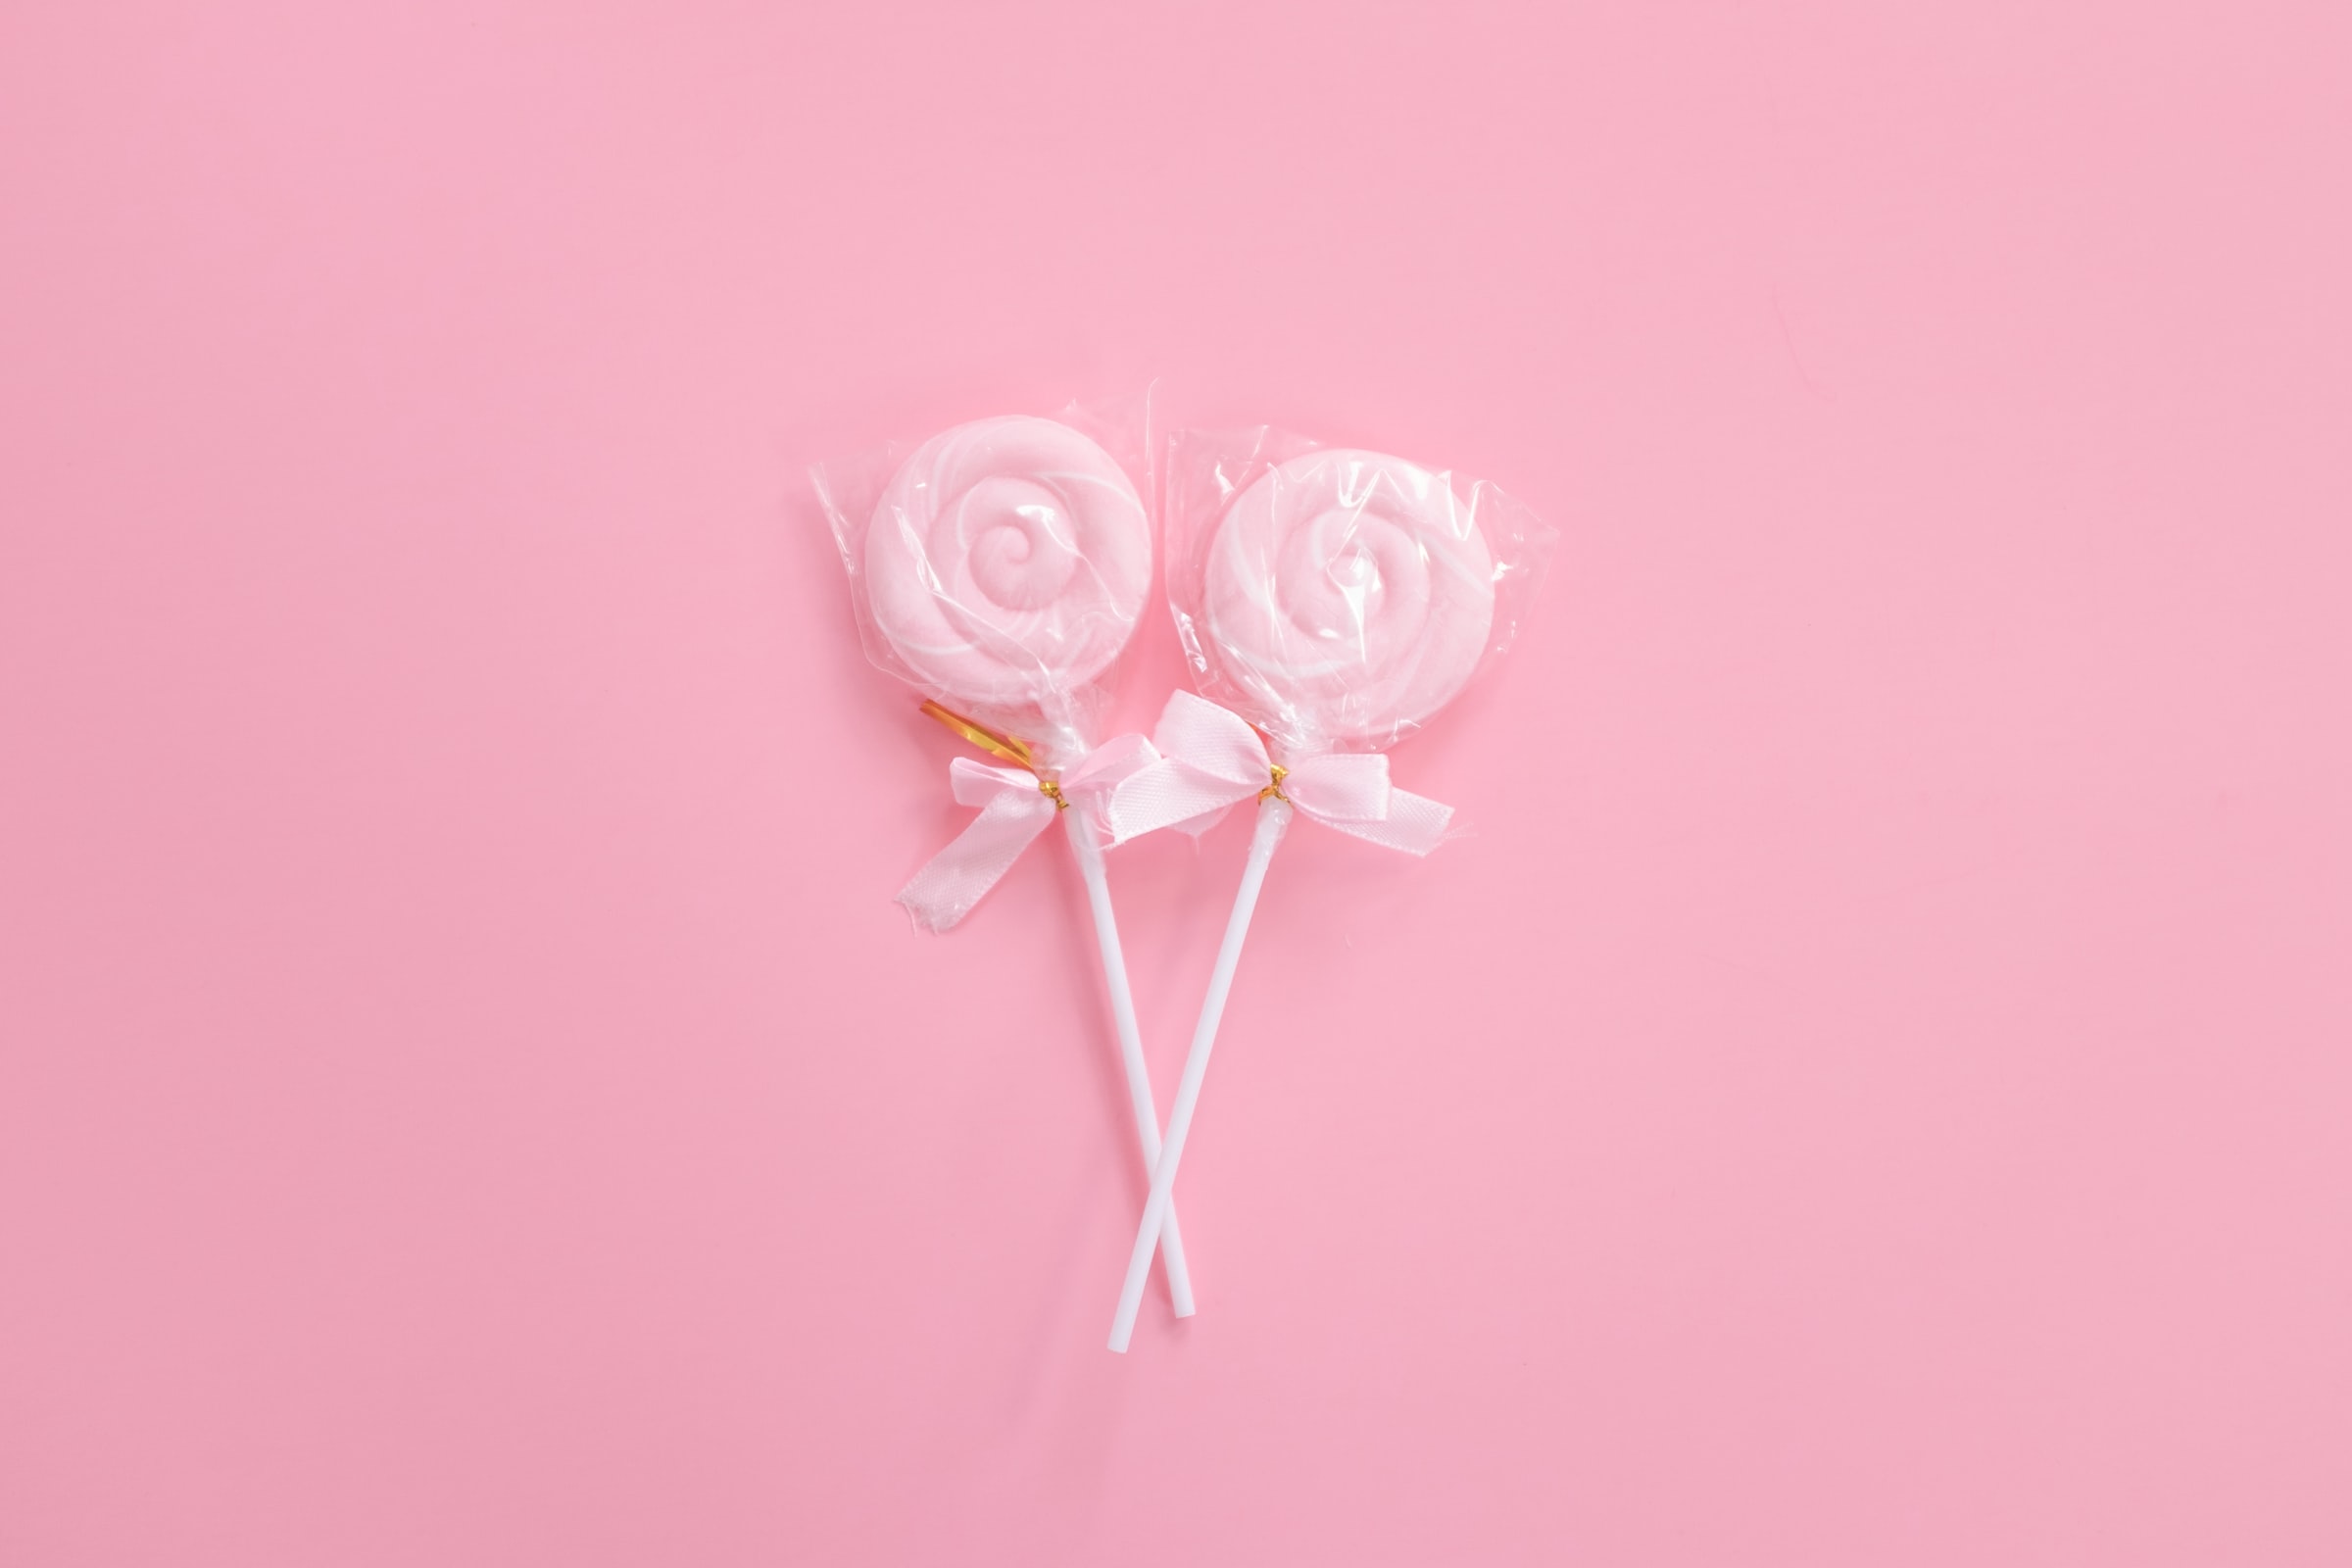 Baby pink lollipops wrapped with gold tie and a pink bow against a candy pink background.